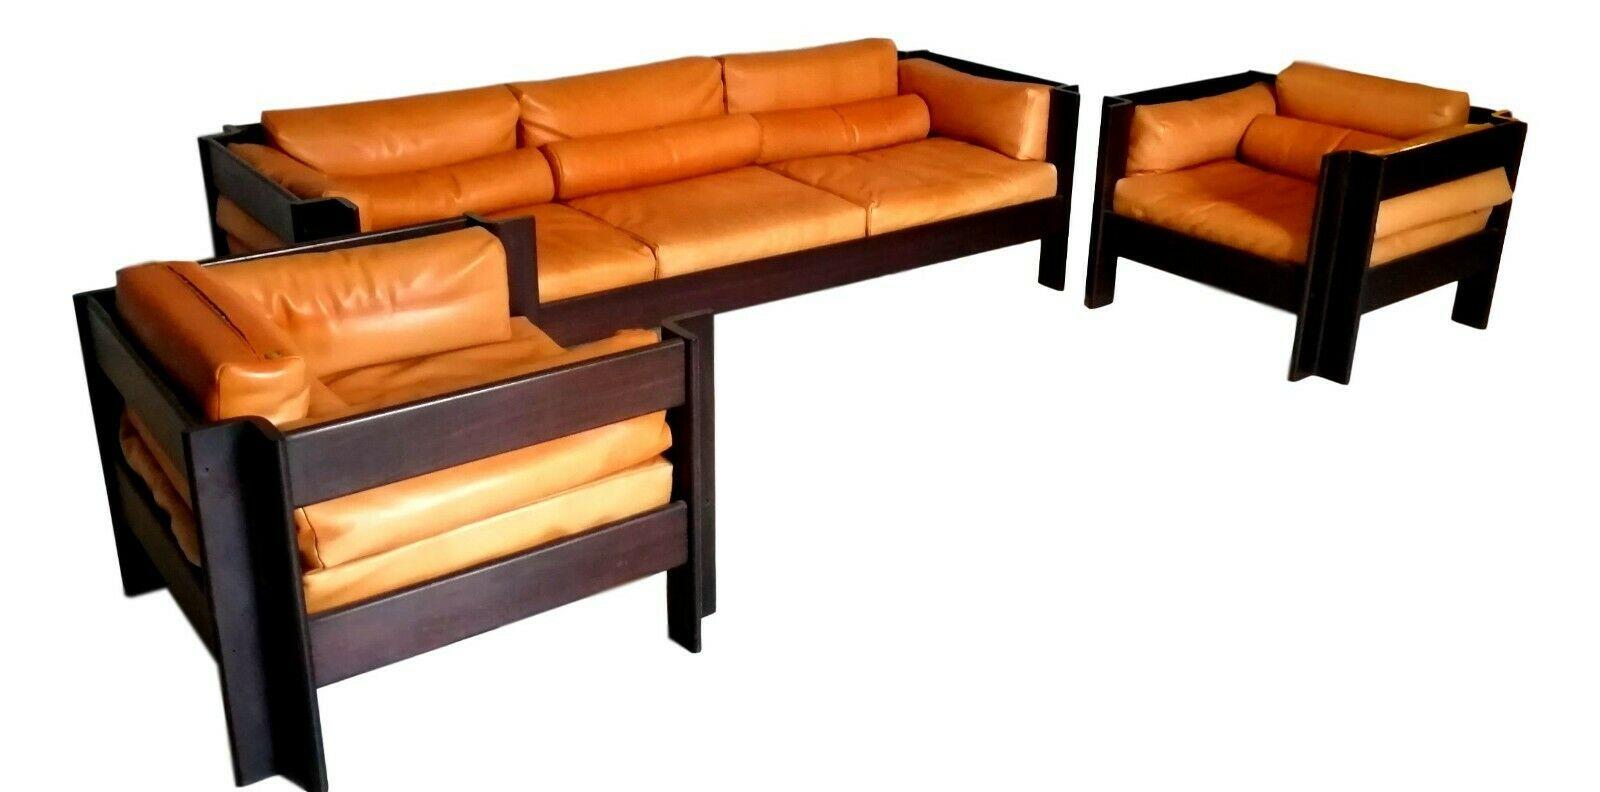 Leather Complete Living Room Sofa and Armchairs Design Sergio Asti for Poltronova, 1962 For Sale